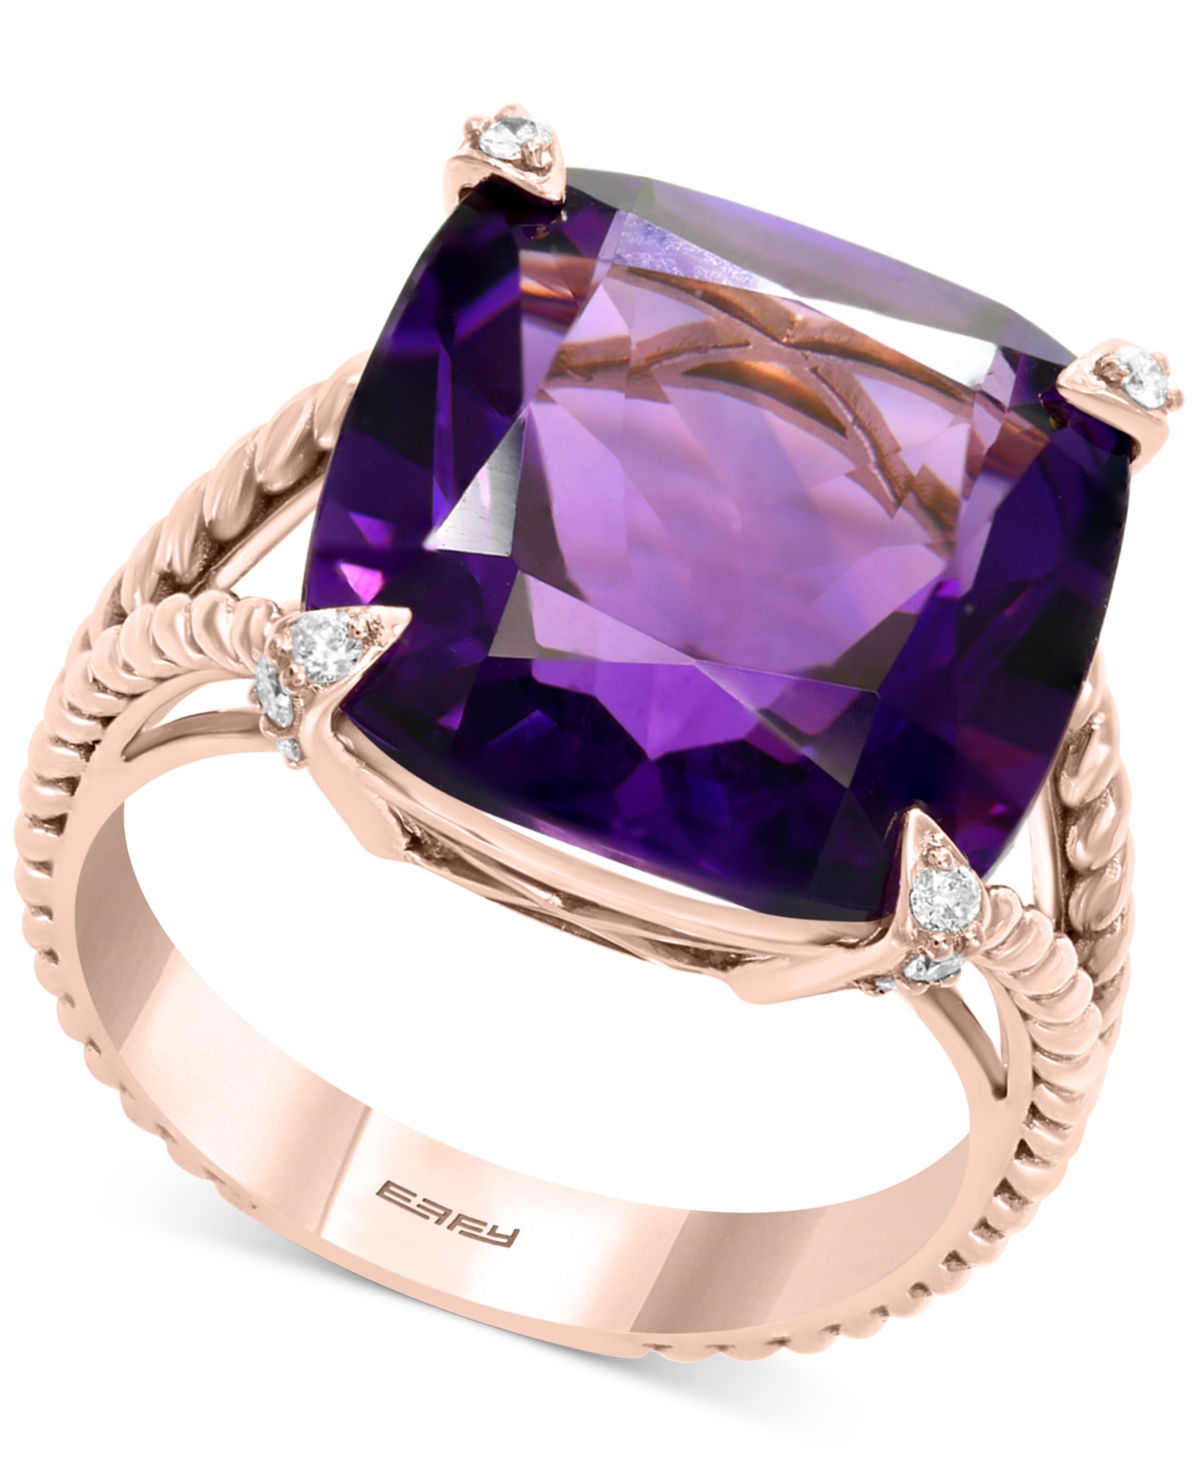 Effy Collection Effy Amethyst (10-3/4 ct. t.w.) & Diamond (1/10 ct. t.w.) Statement Ring in 14k Rose Gold